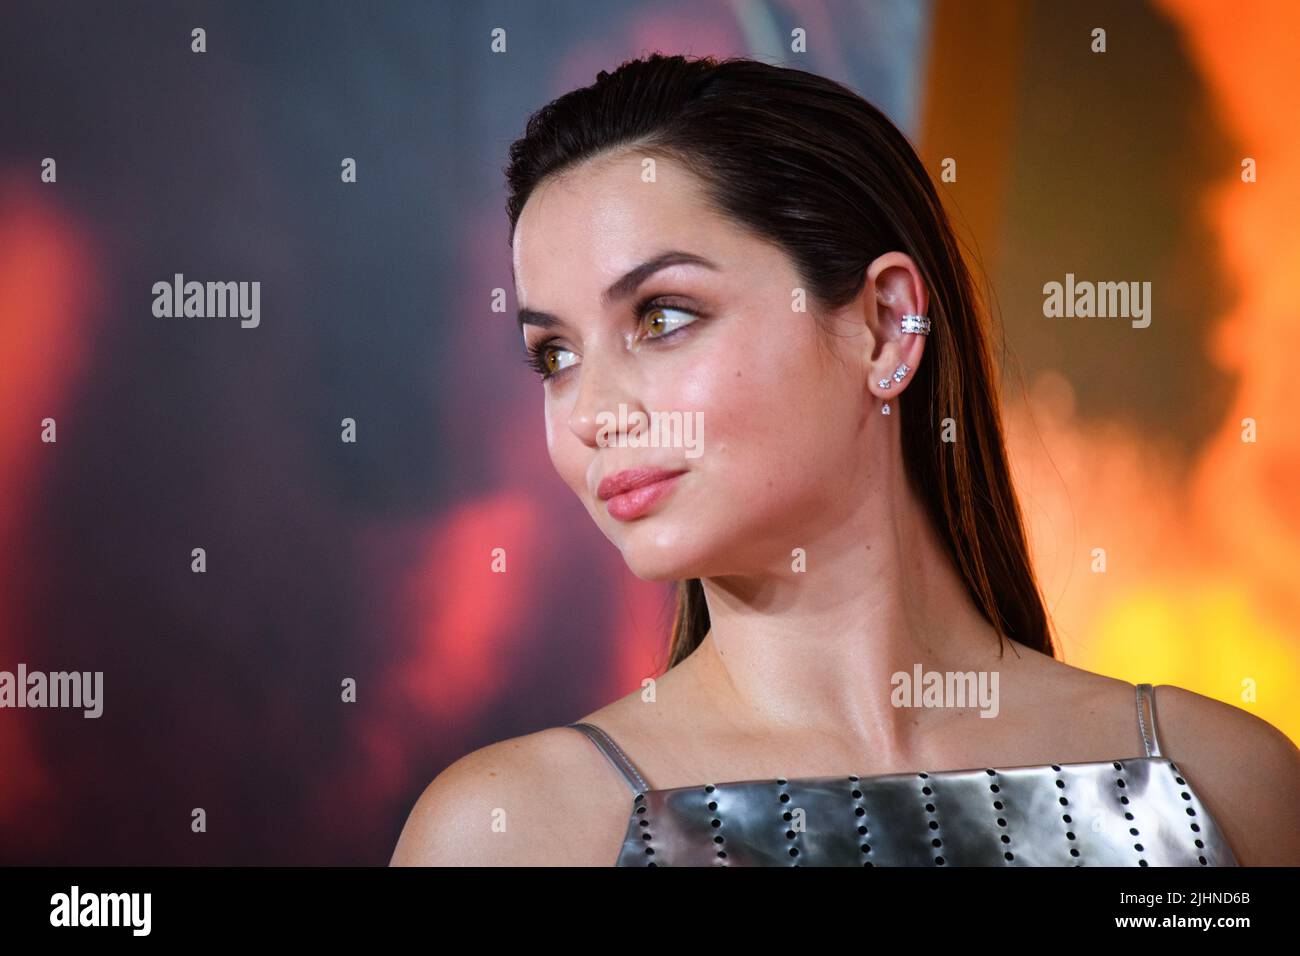 London, UK. 19 July 2022. Ana de Armas attending a special screening of The Gray Man, at BFI Southbank in London Picture date: Tuesday July 19, 2022. Photo credit should read: Matt Crossick/Empics/Alamy Live News Stock Photo